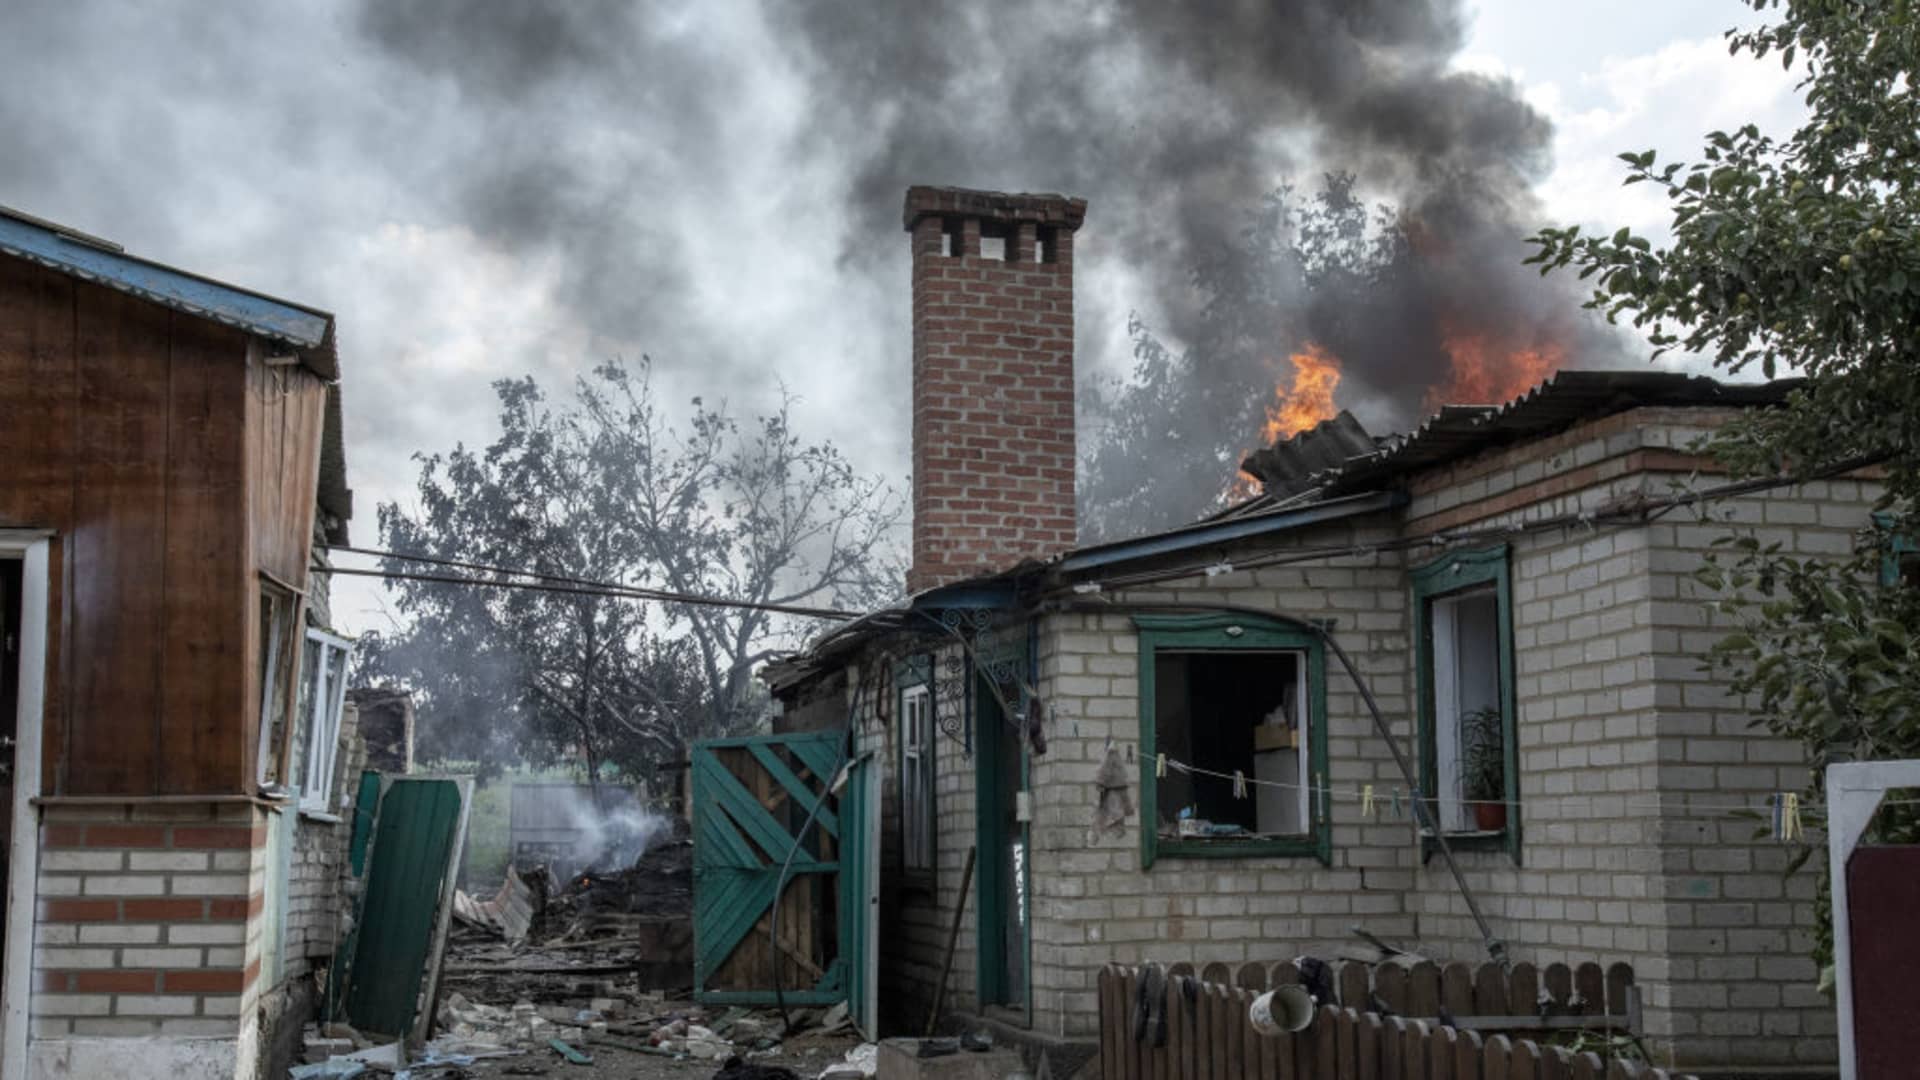 A house burning during shelling in Ukraine, on July 4, 2022.